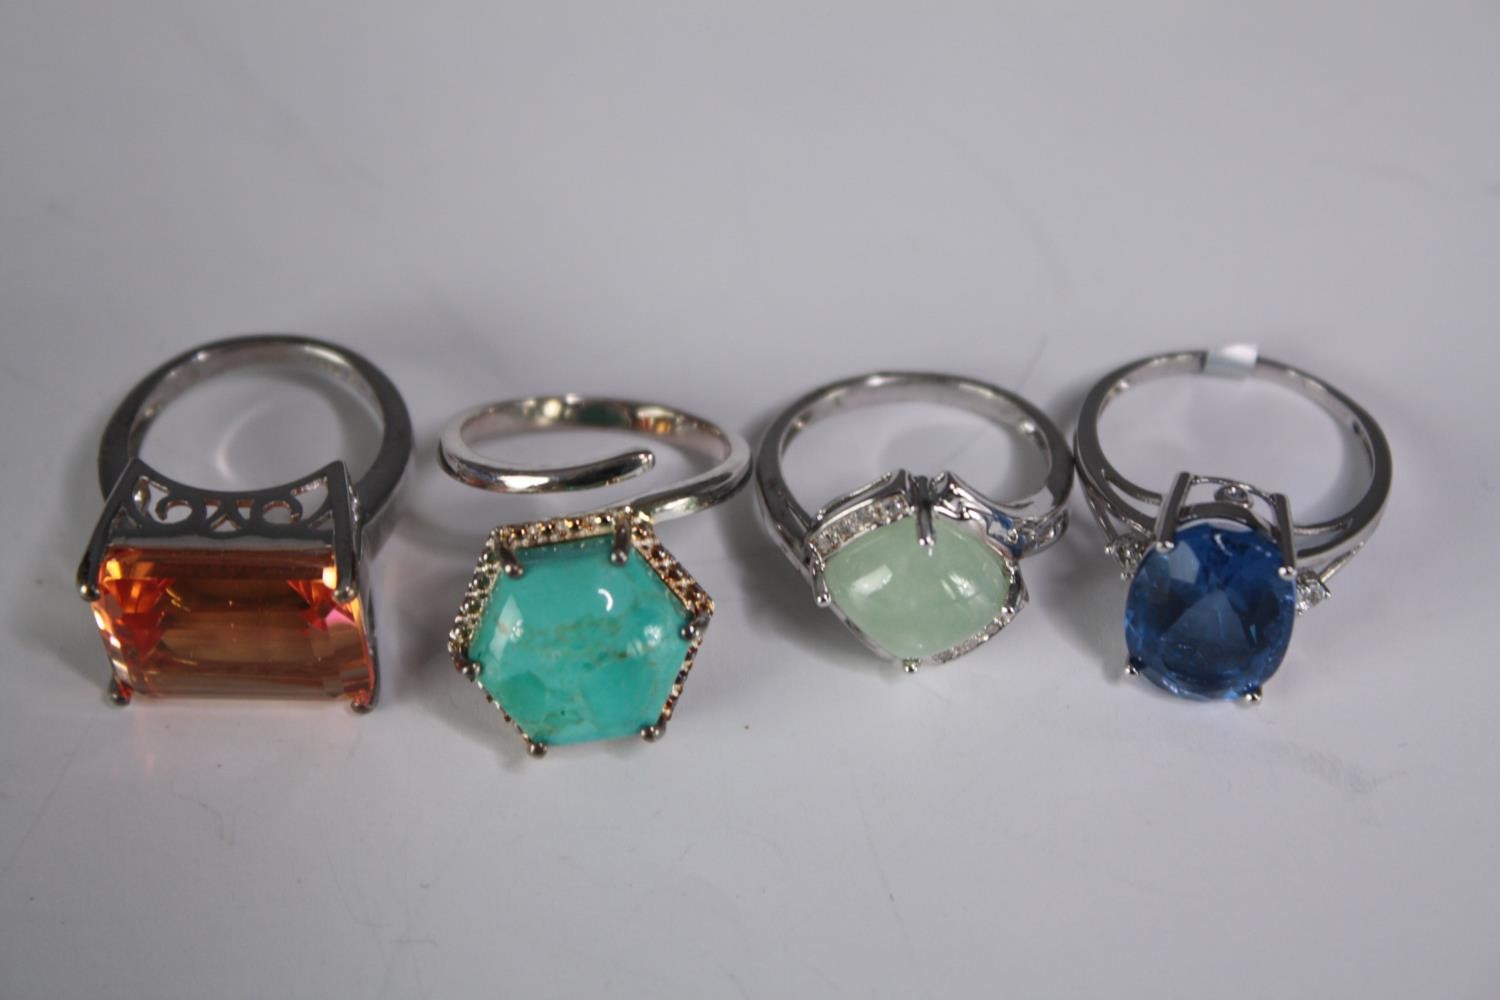 A collection of ten silver gem-set rings of various designs. Set with Blue topaz, Turquoise, - Image 5 of 5